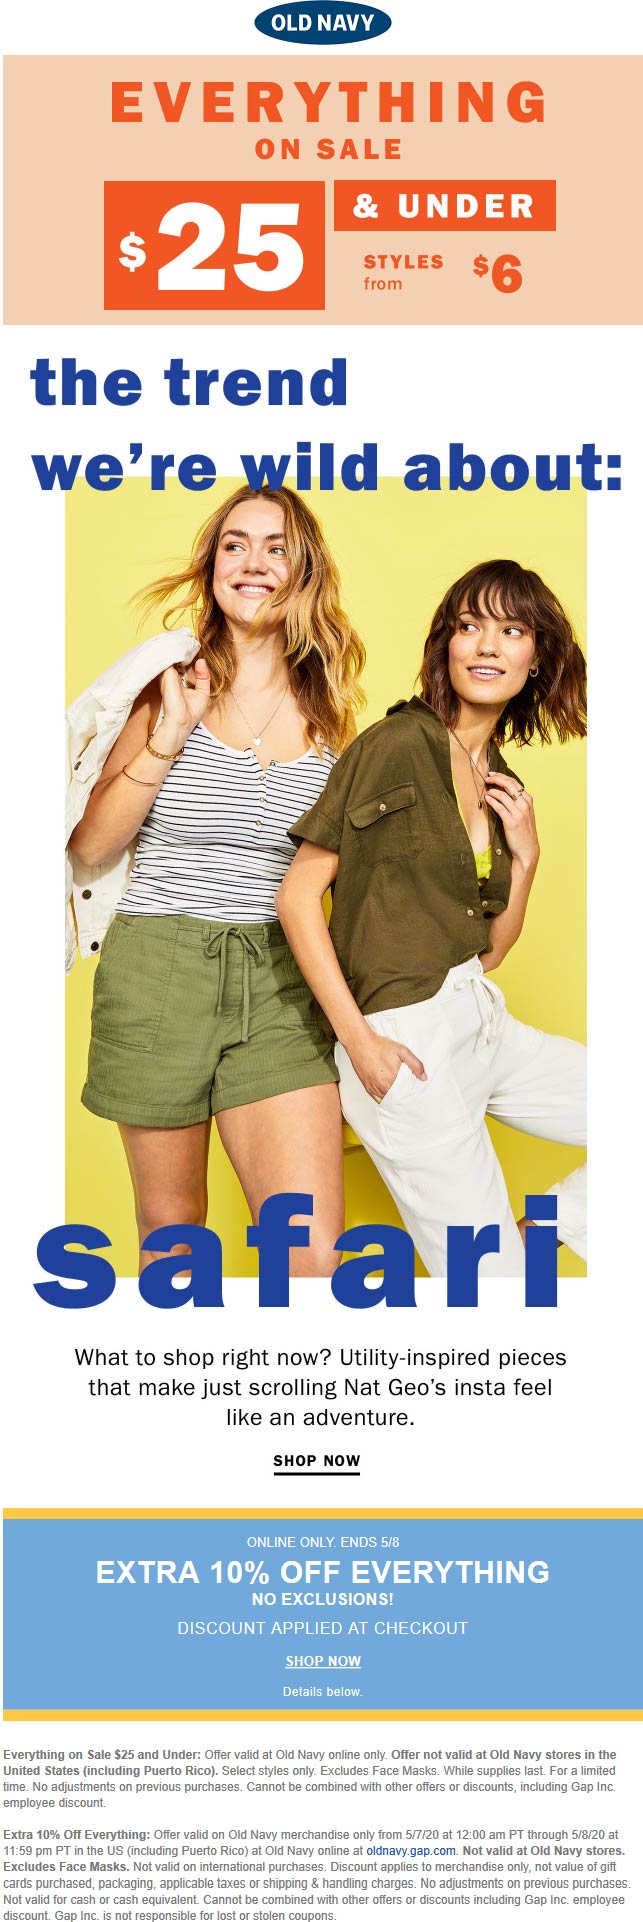 Old Navy stores Coupon  Everything under $26 + 10% off today at Old Navy #oldnavy